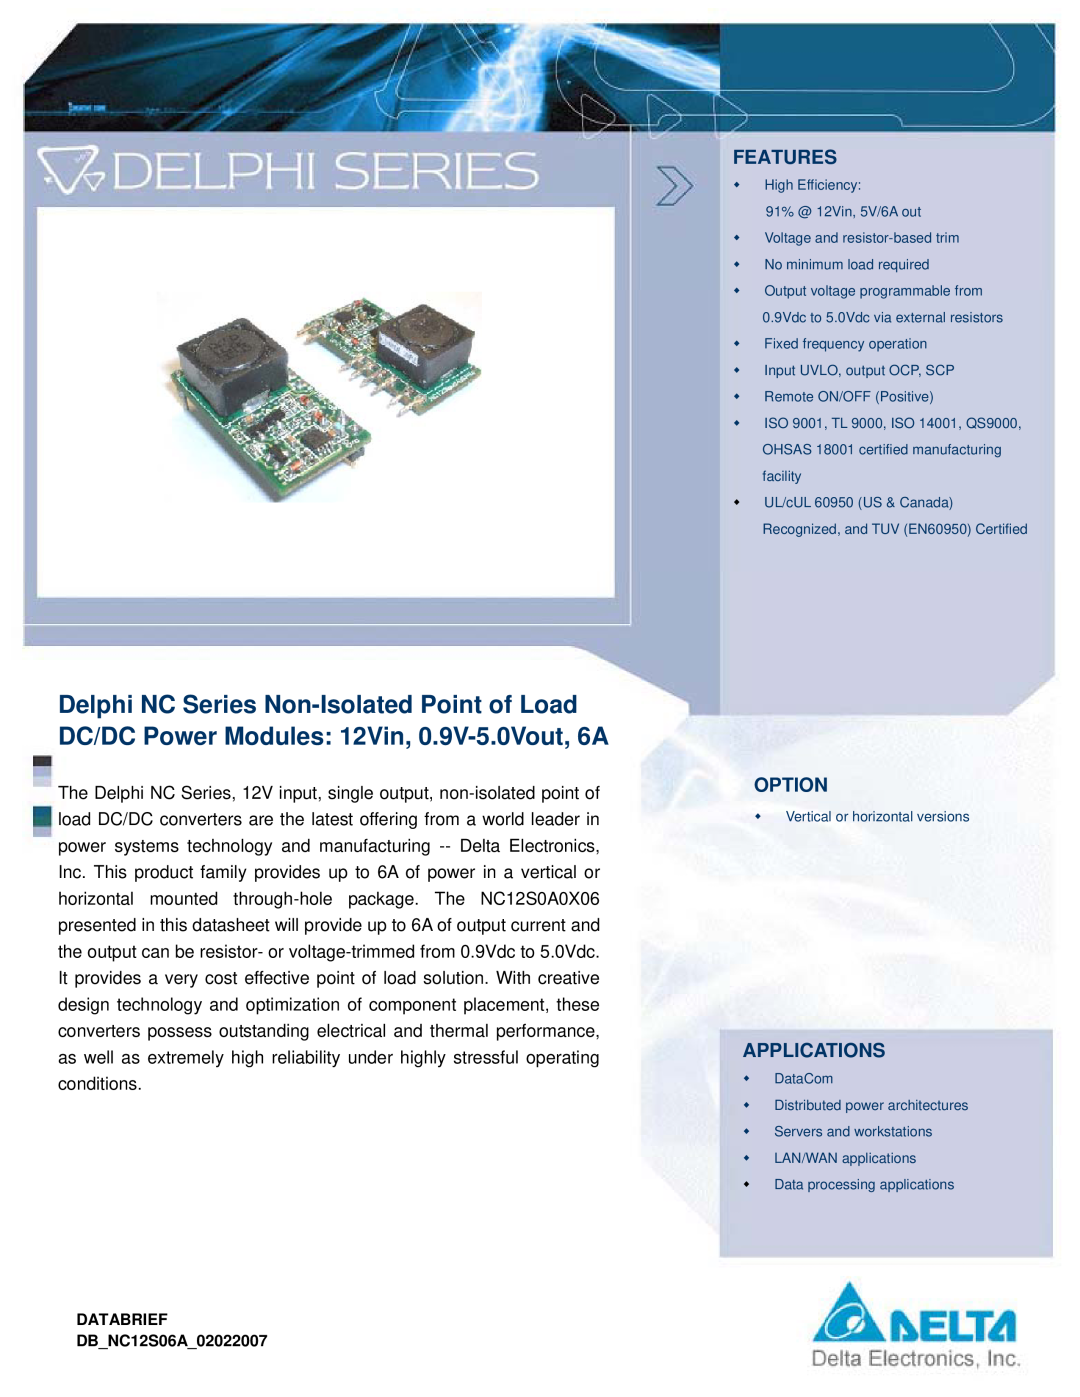 Delta Electronics NC Series manual Features, Option, Applications, DATABRIEF DBNC12S06A02022007 